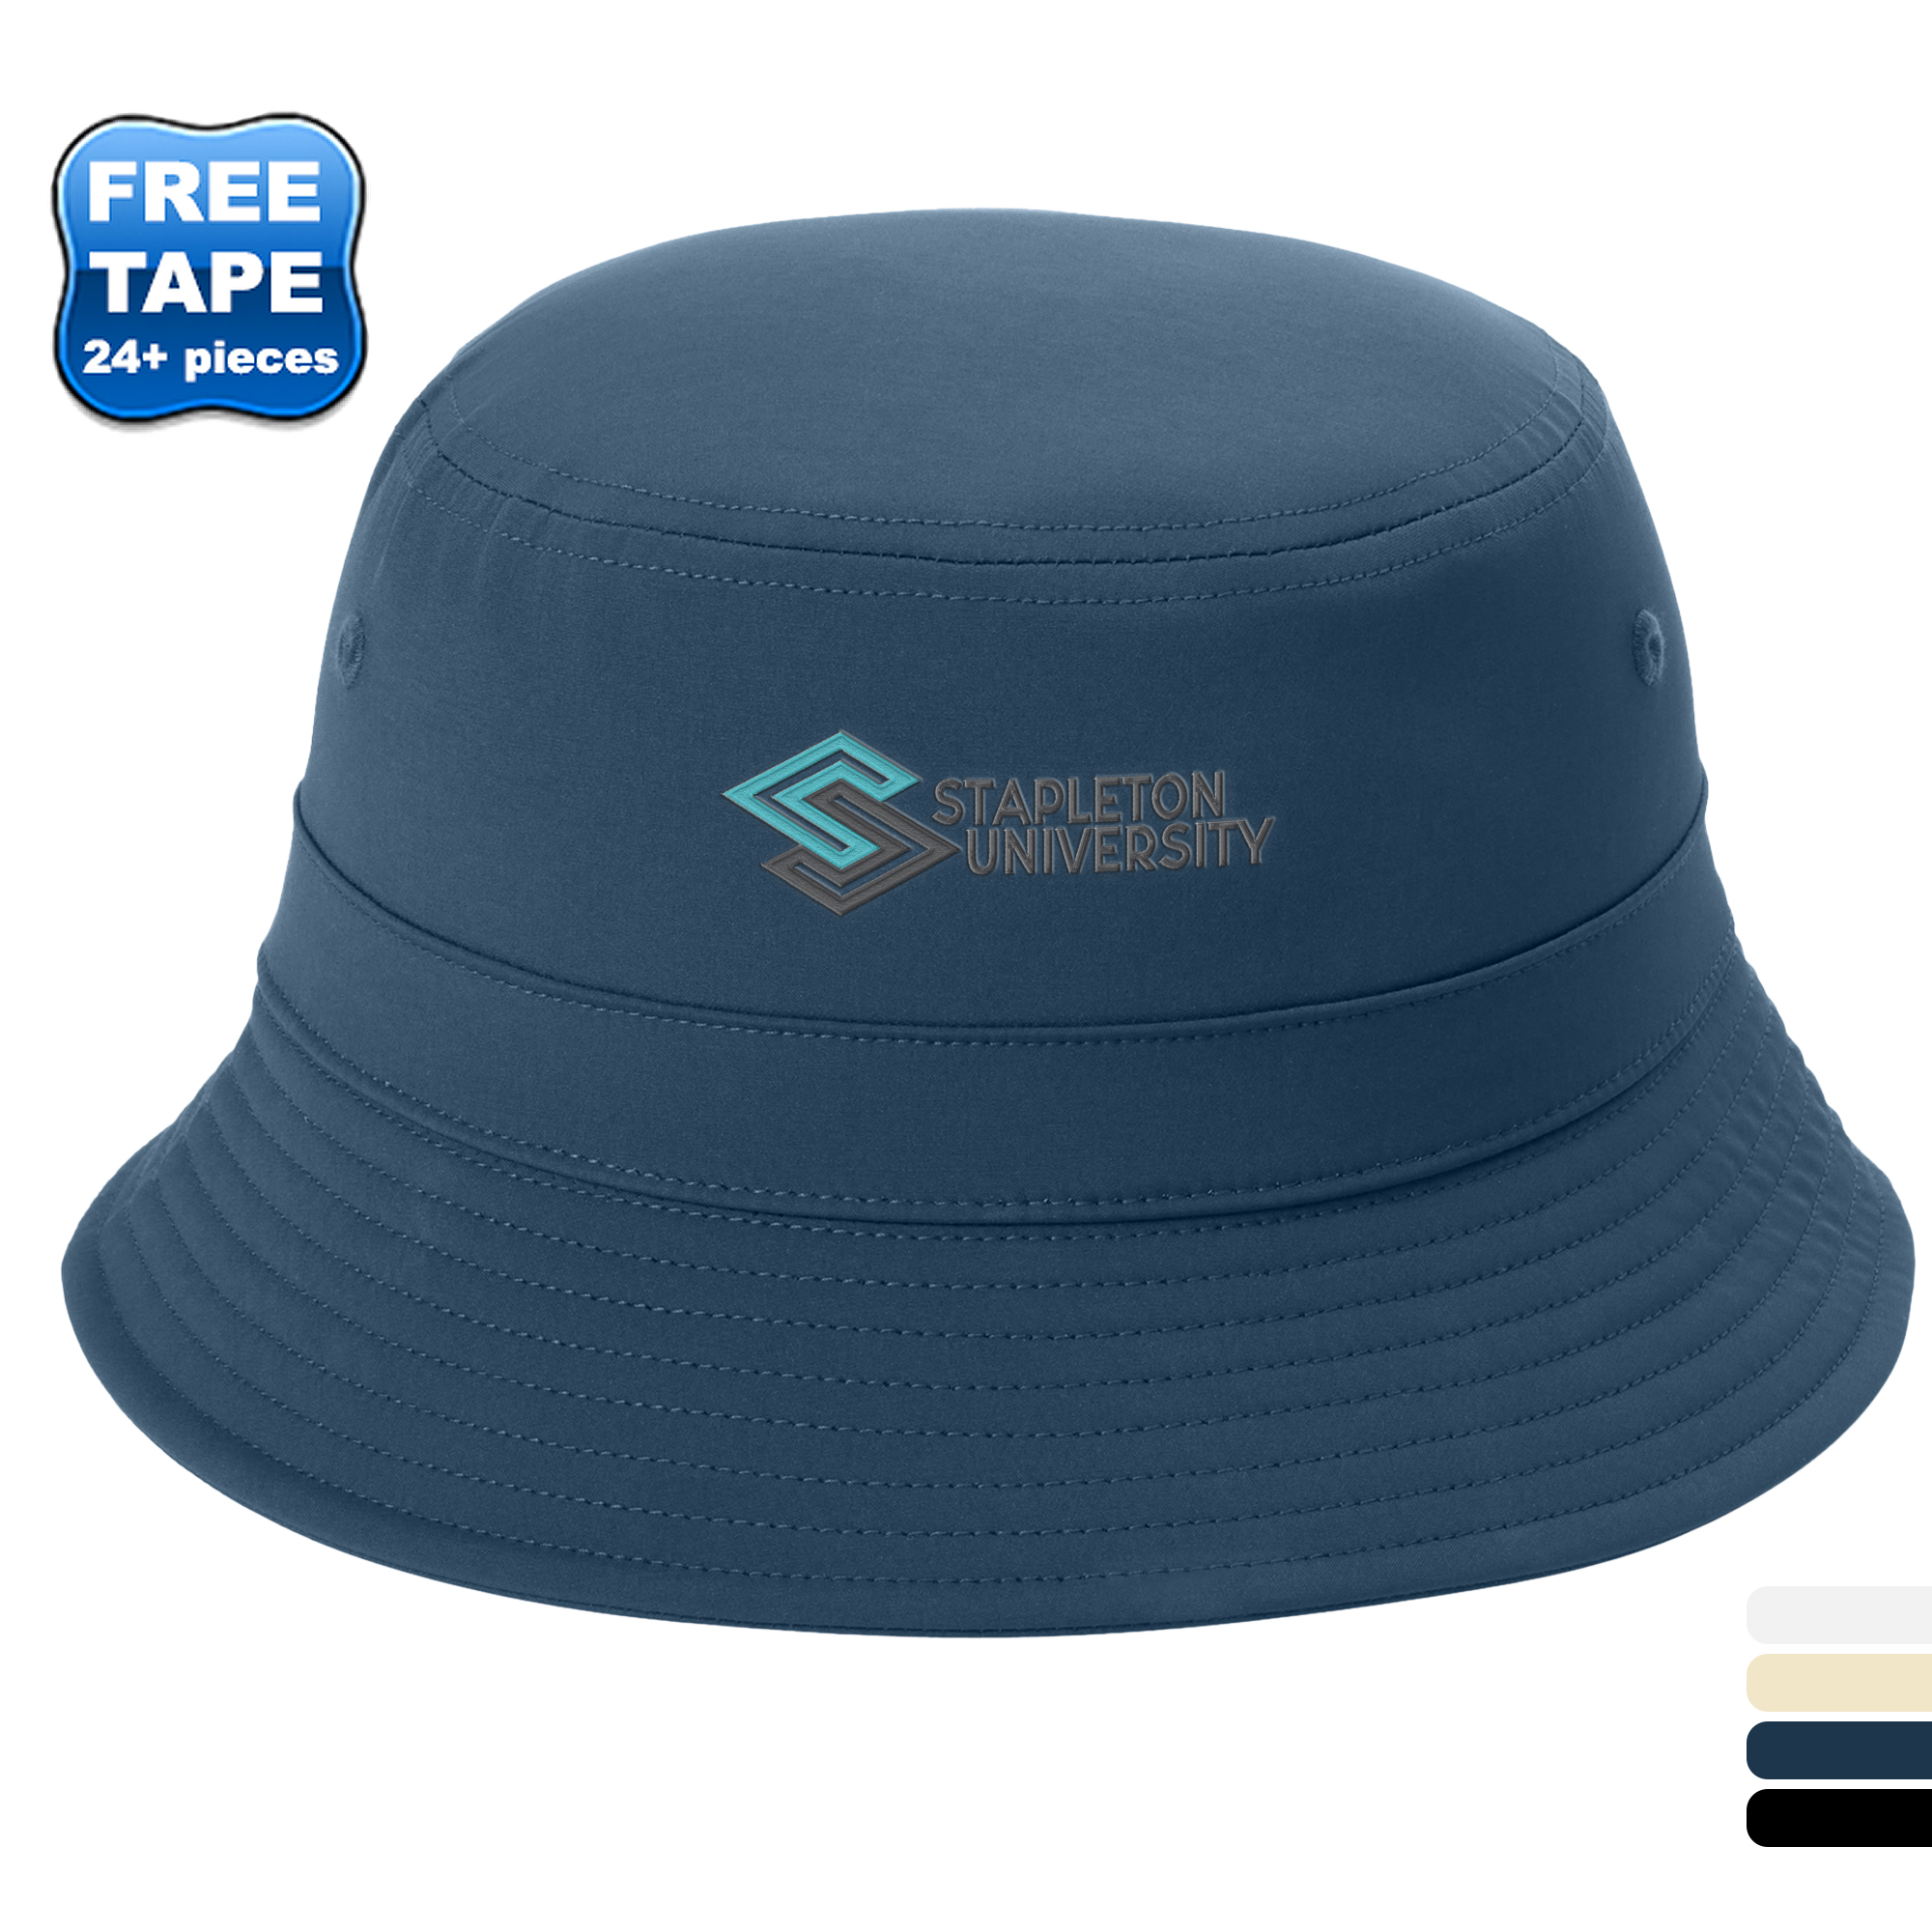 Visors & Summer Hats by Fire & Public Safety Awareness Promotional Products